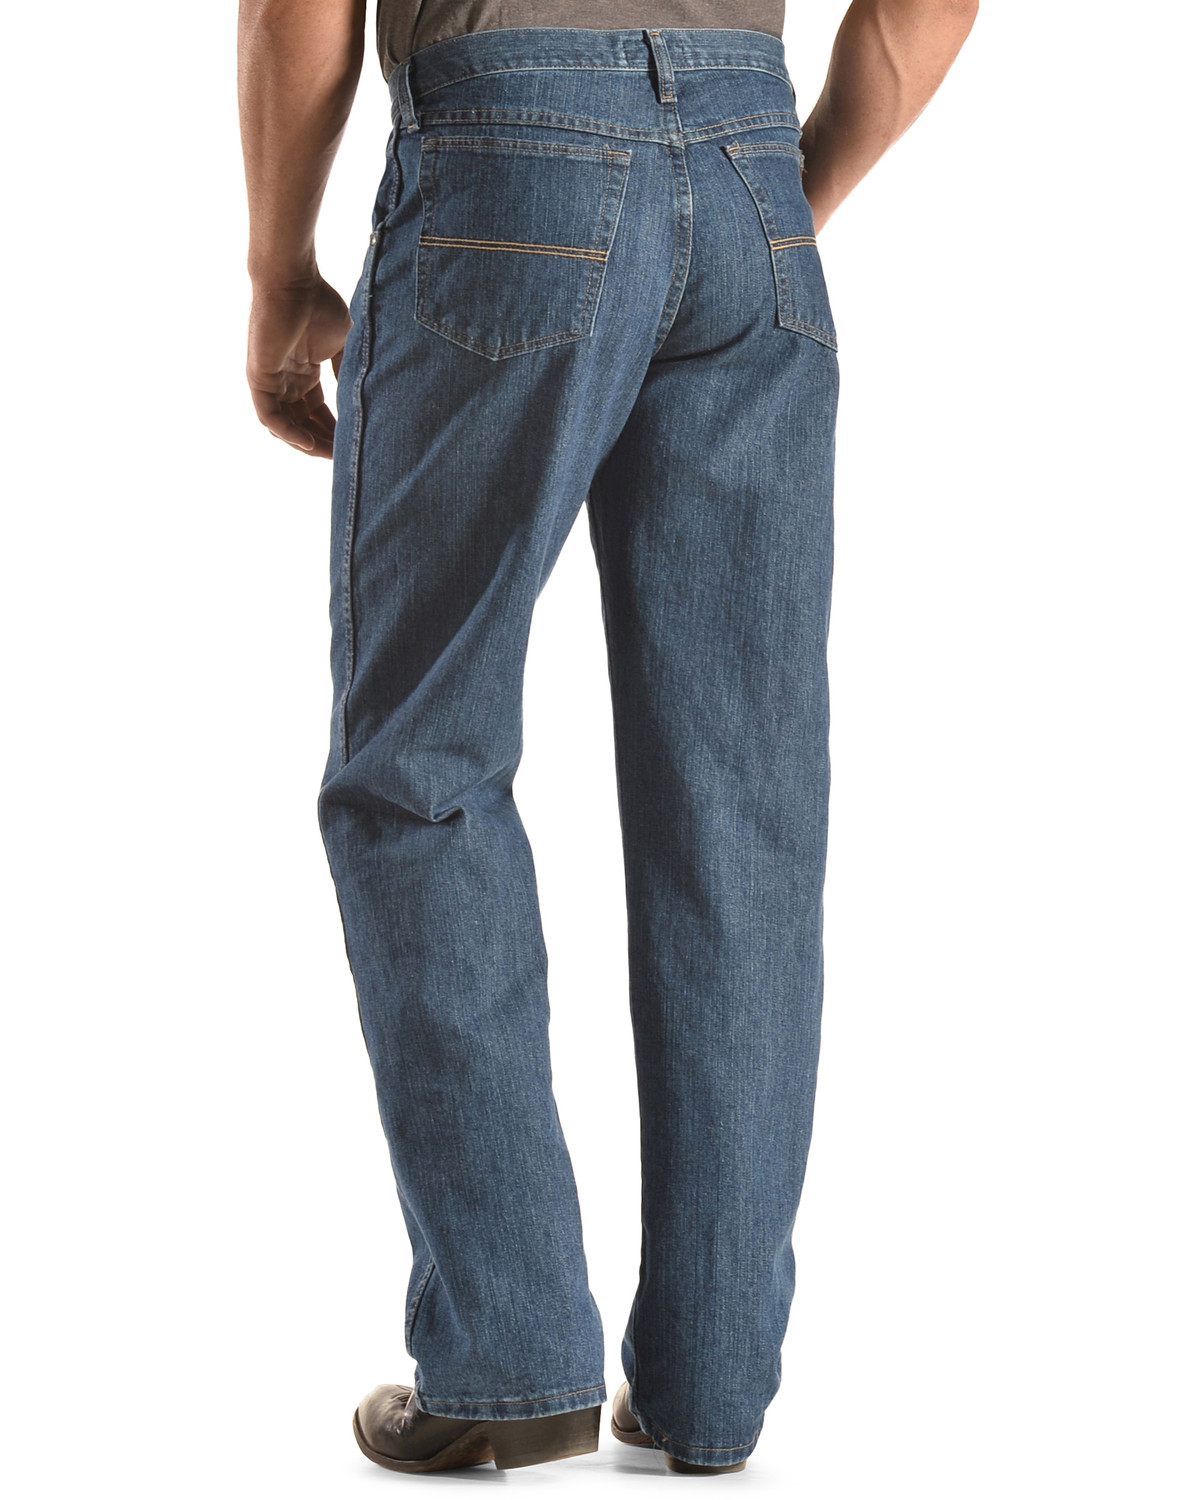 Wrangler 20X Jeans - No. 23 Relaxed Fit | Sheplers